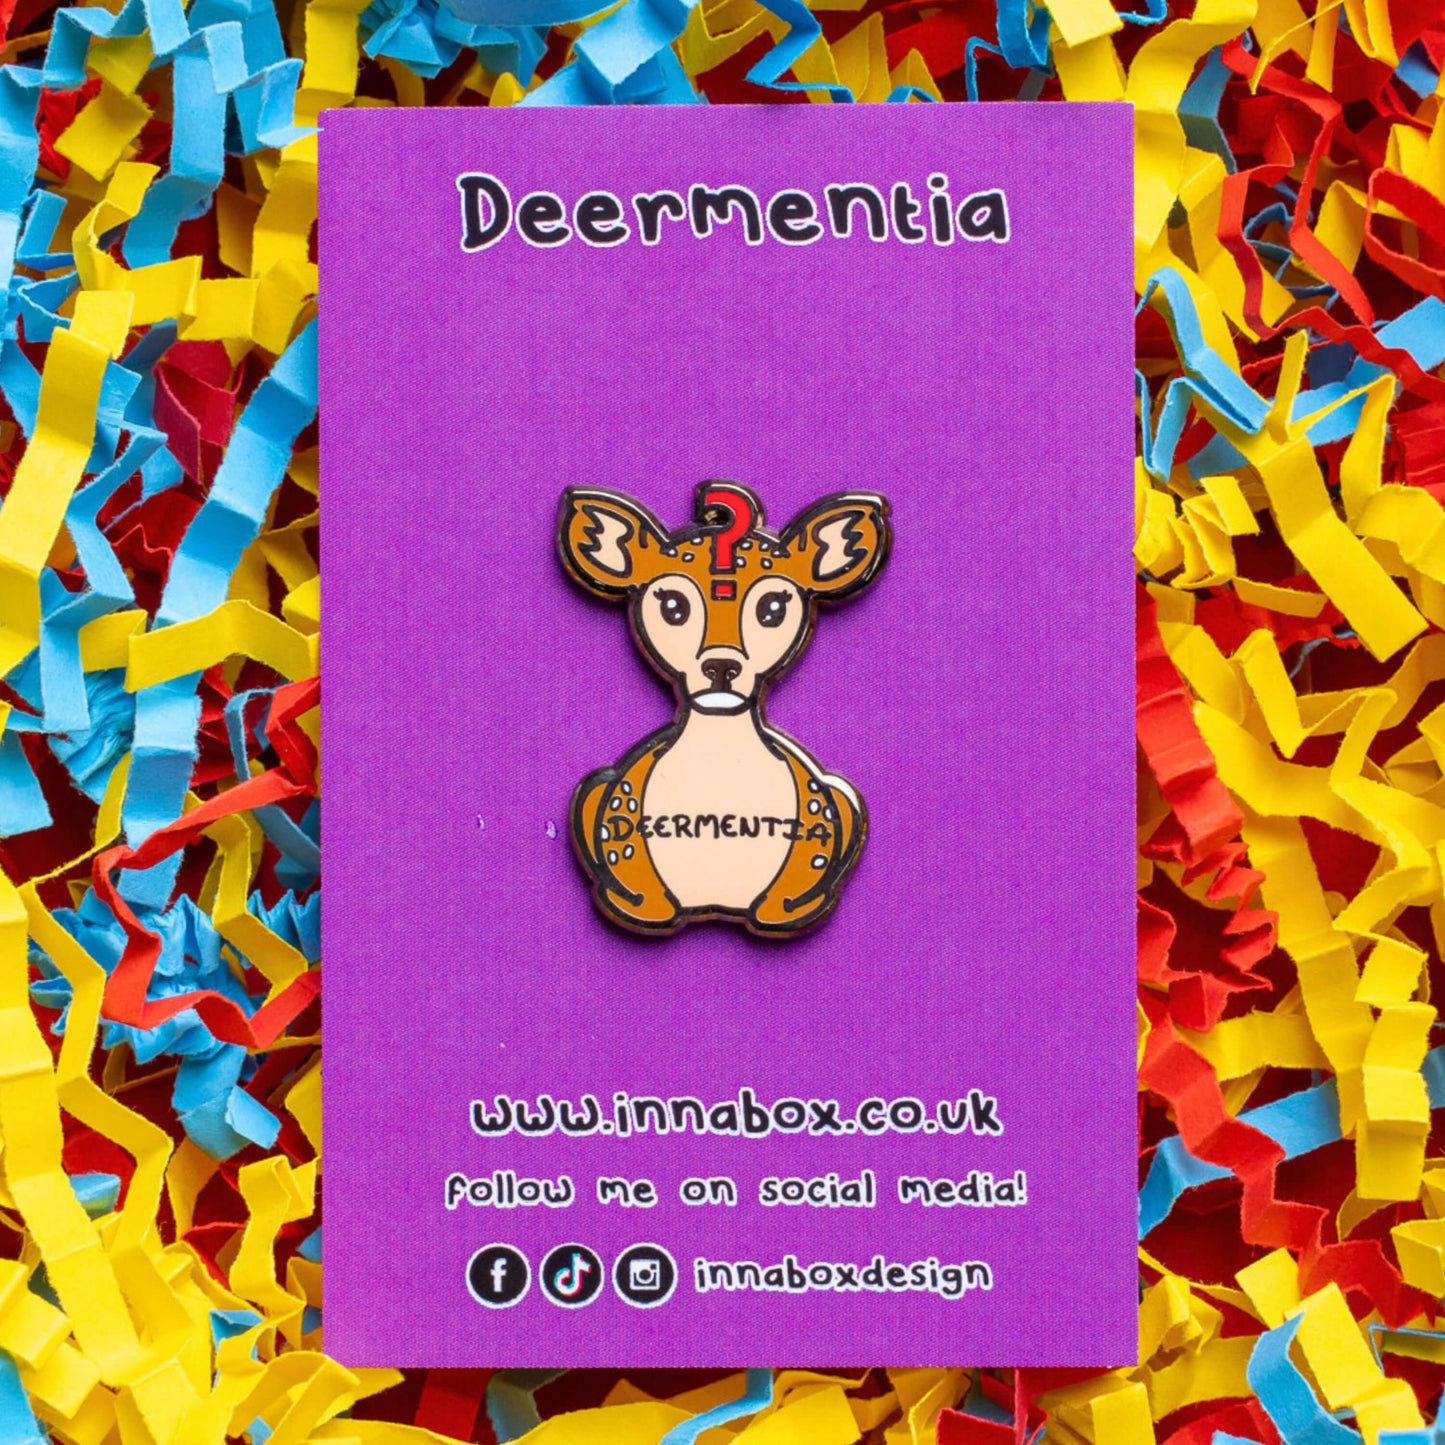 The Deermentia Deer Enamel Pin - Dementia on purple backing card laid on a red, blue and yellow card confetti background. A brown female deer laying down with a vacant expression and red question mark above its head with 'deermentia' written across its middle. The hand drawn design is raising awareness for dementia.